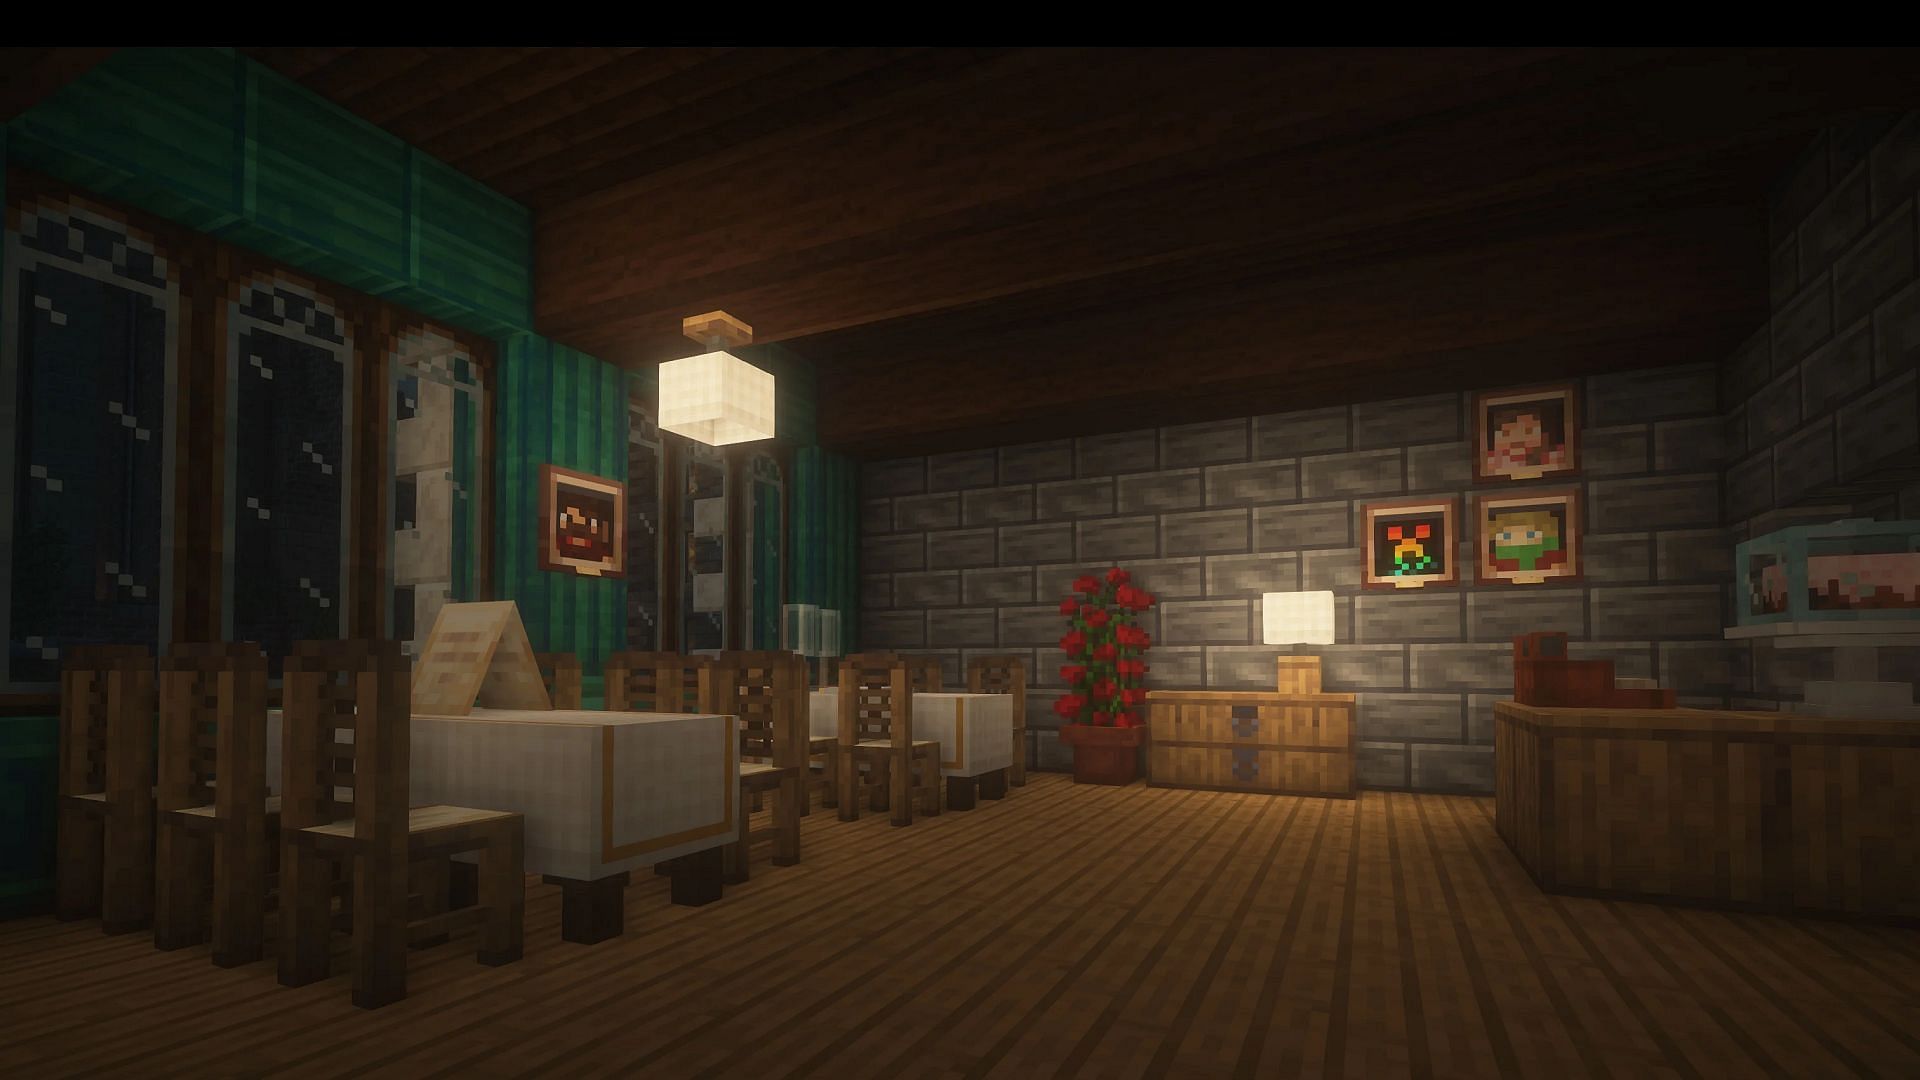 This Minecraft kitchen mod is perfect for more relaxed and personal dining. (Image via Satisfyu/Modrinth)